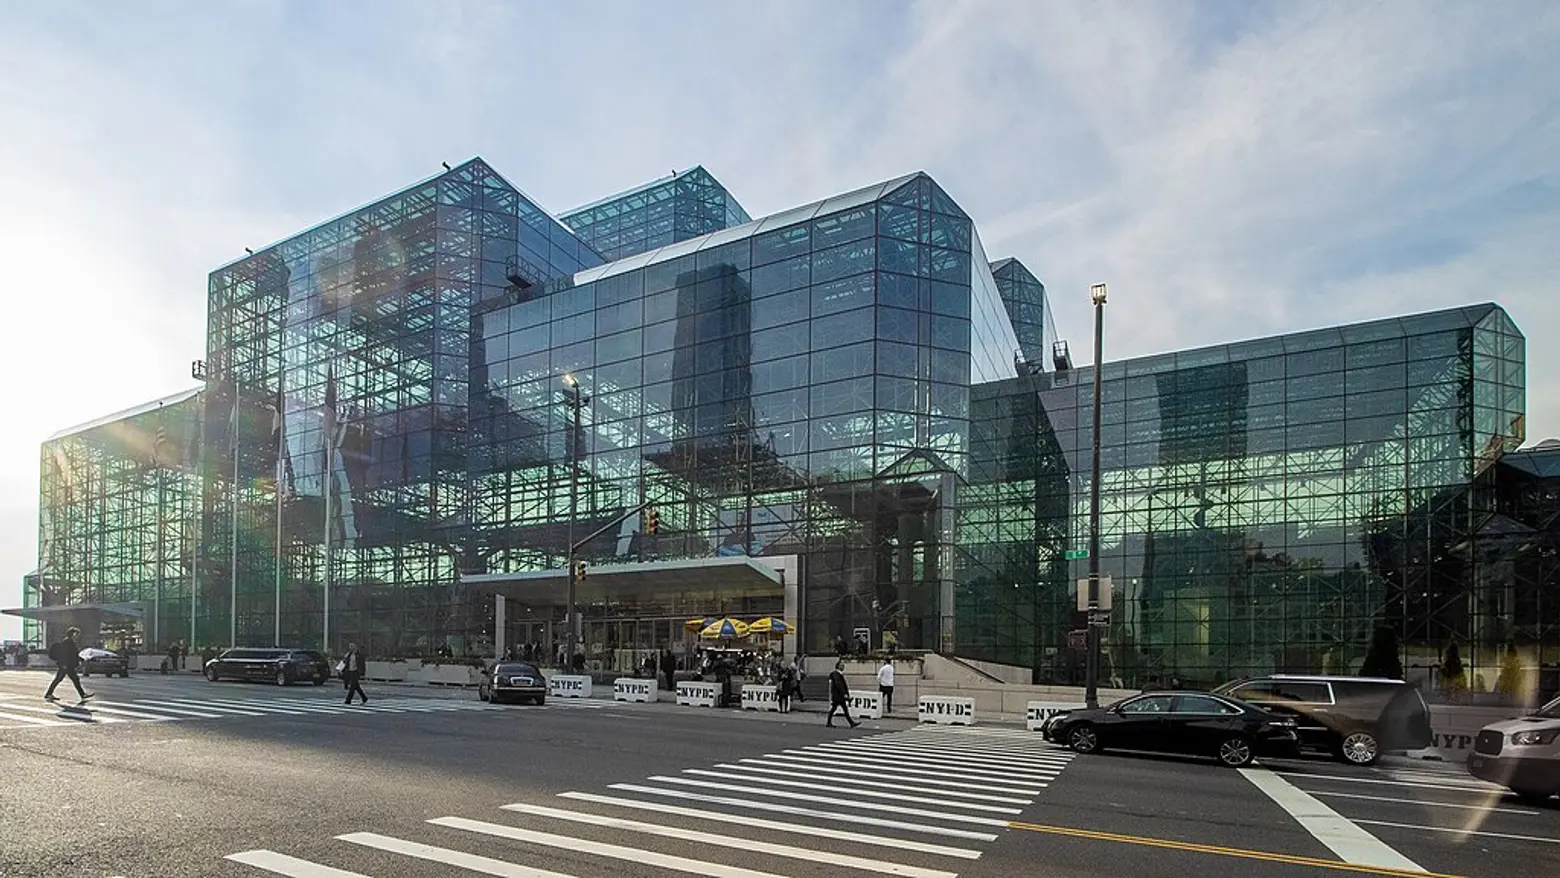 New York seeks proposals for new hotel or mixed-use development across from Javits Center